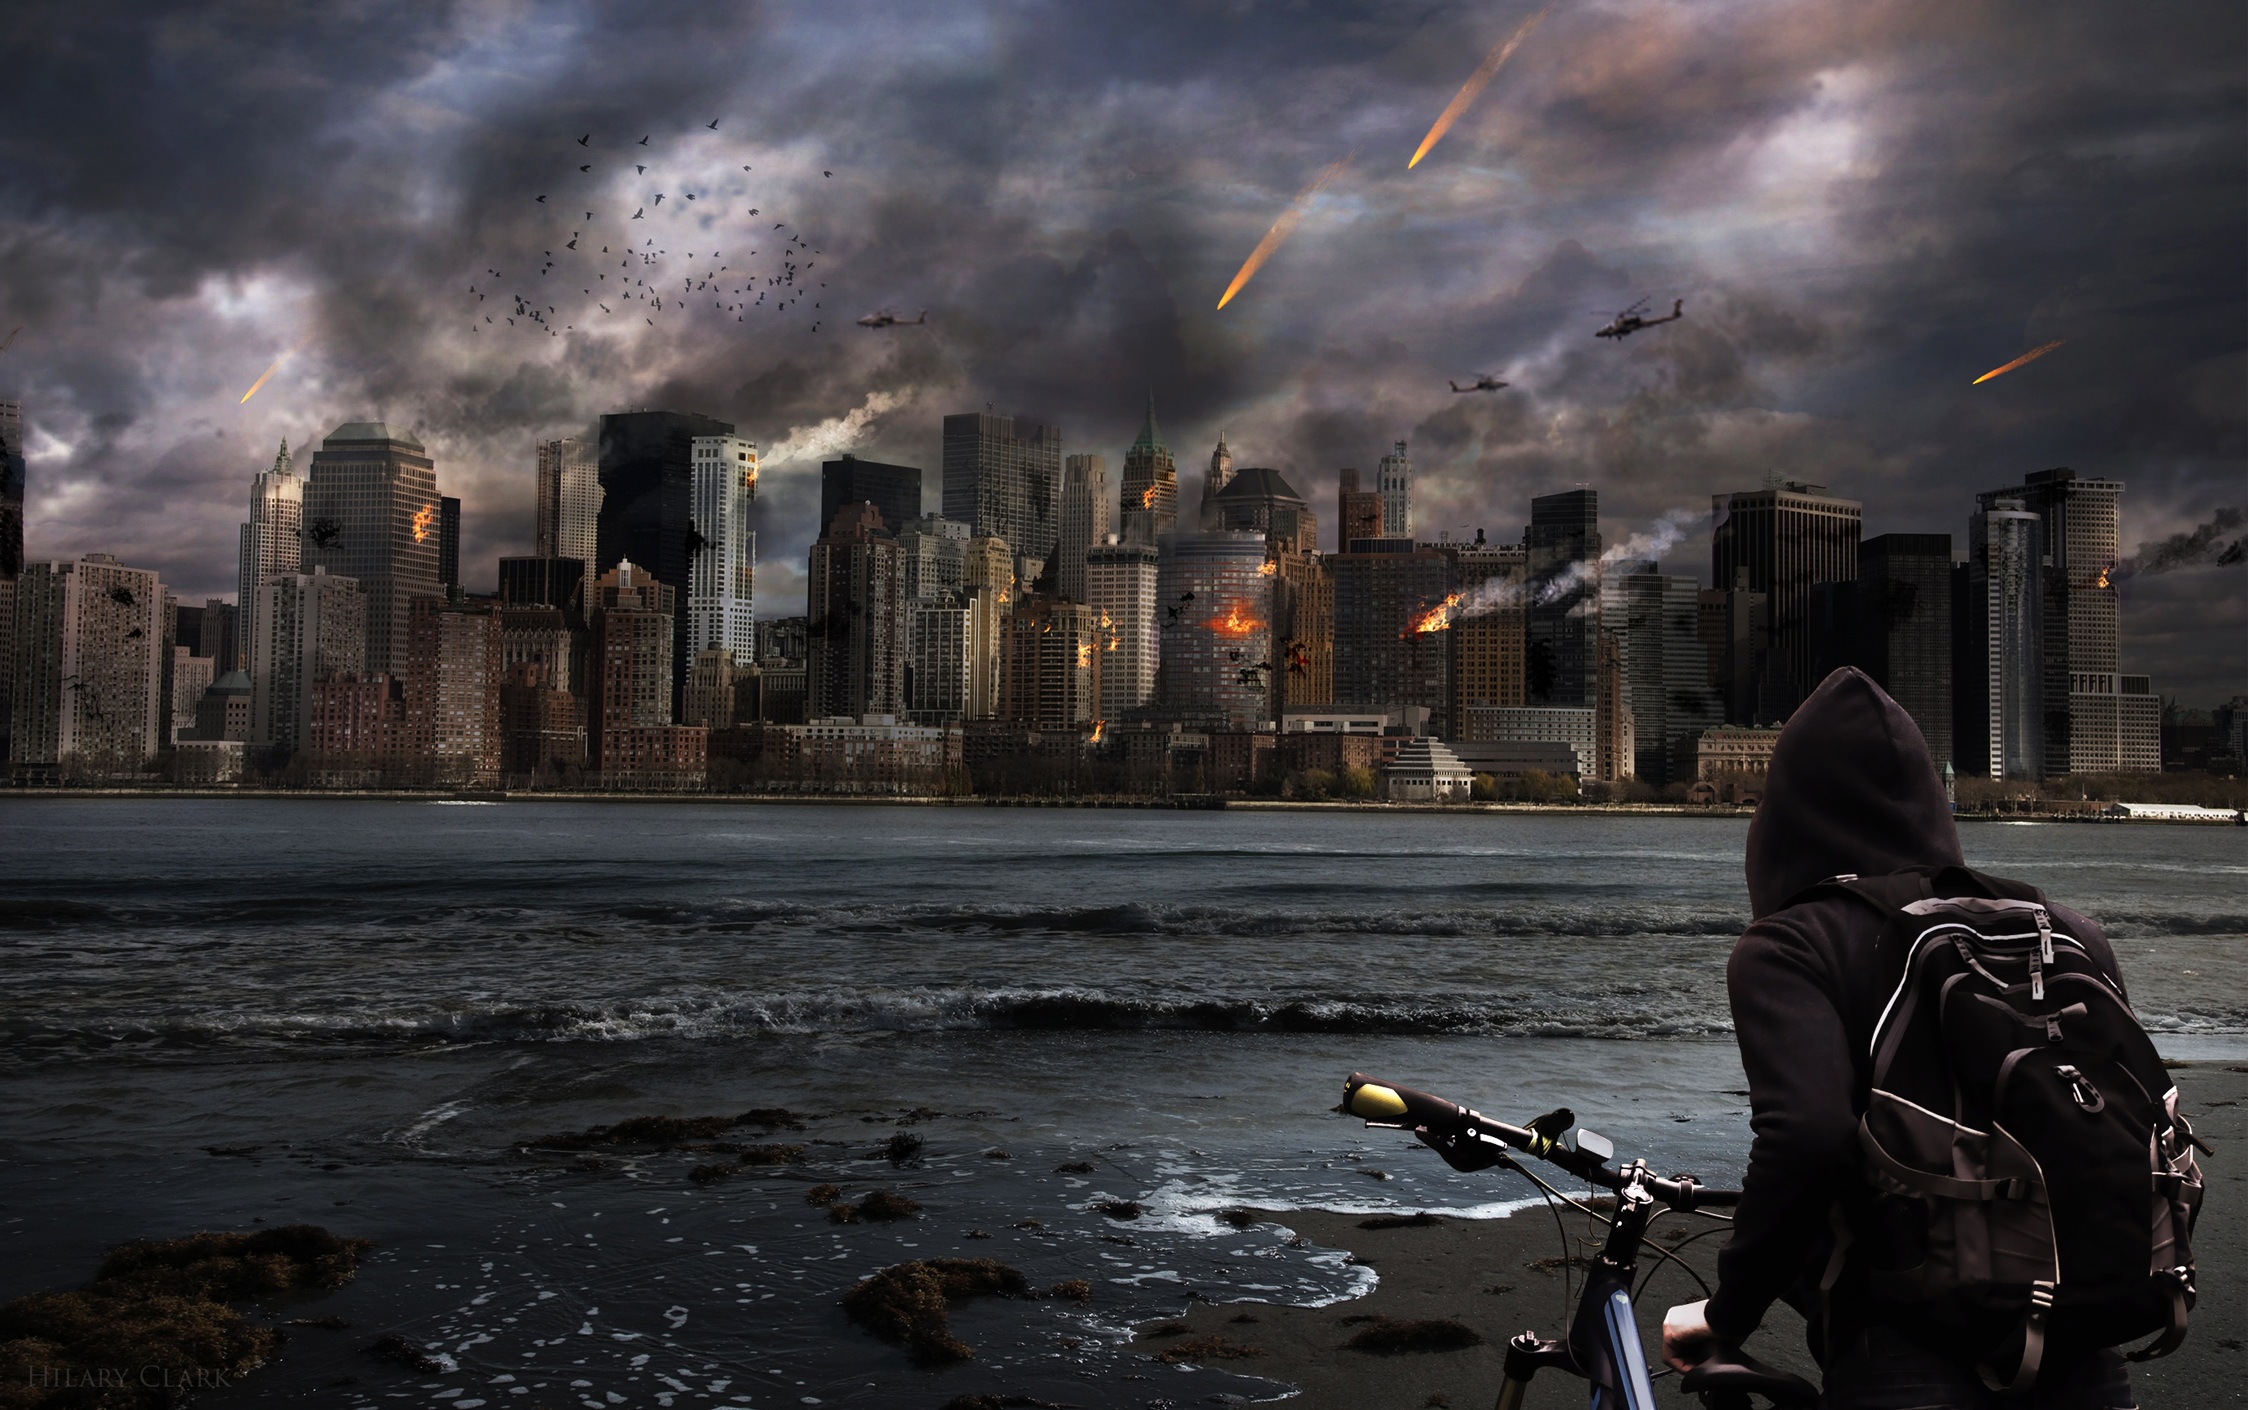 Sci Fi Apocalyptic HD Wallpaper | Background Image